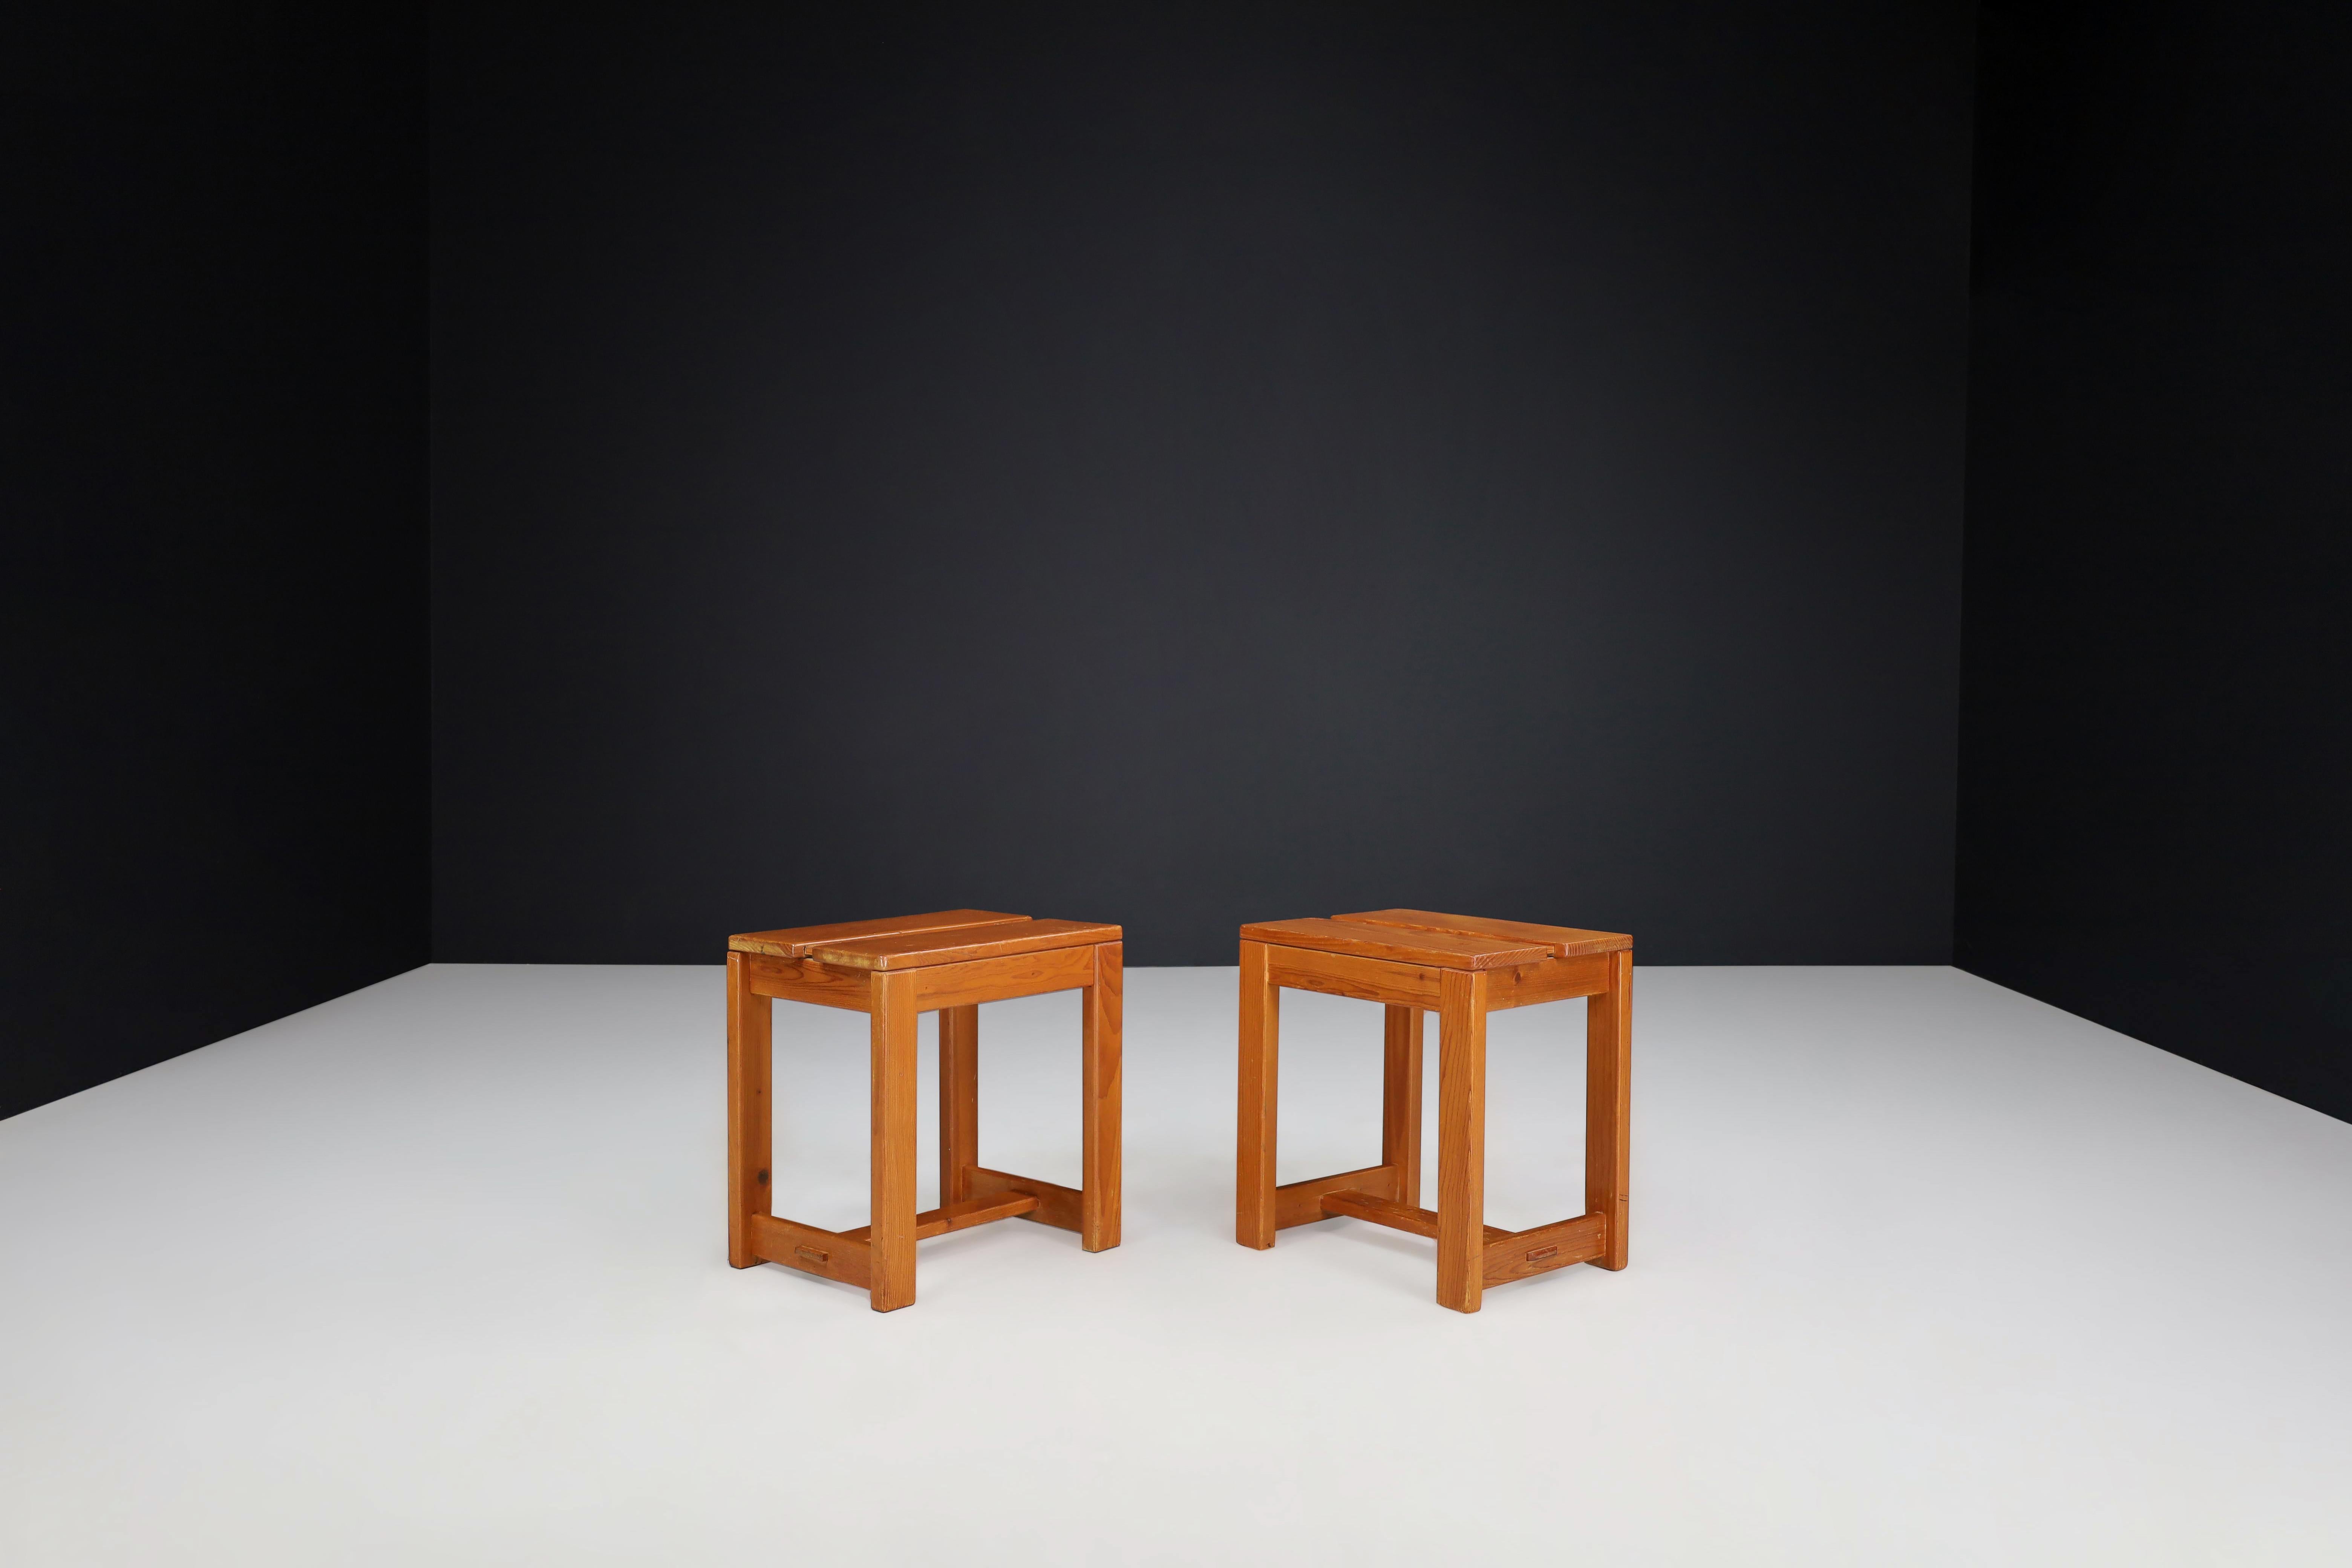 20th Century Midcentury Pine Stools in the Style off Charlotte Perriand, France, 1960s For Sale